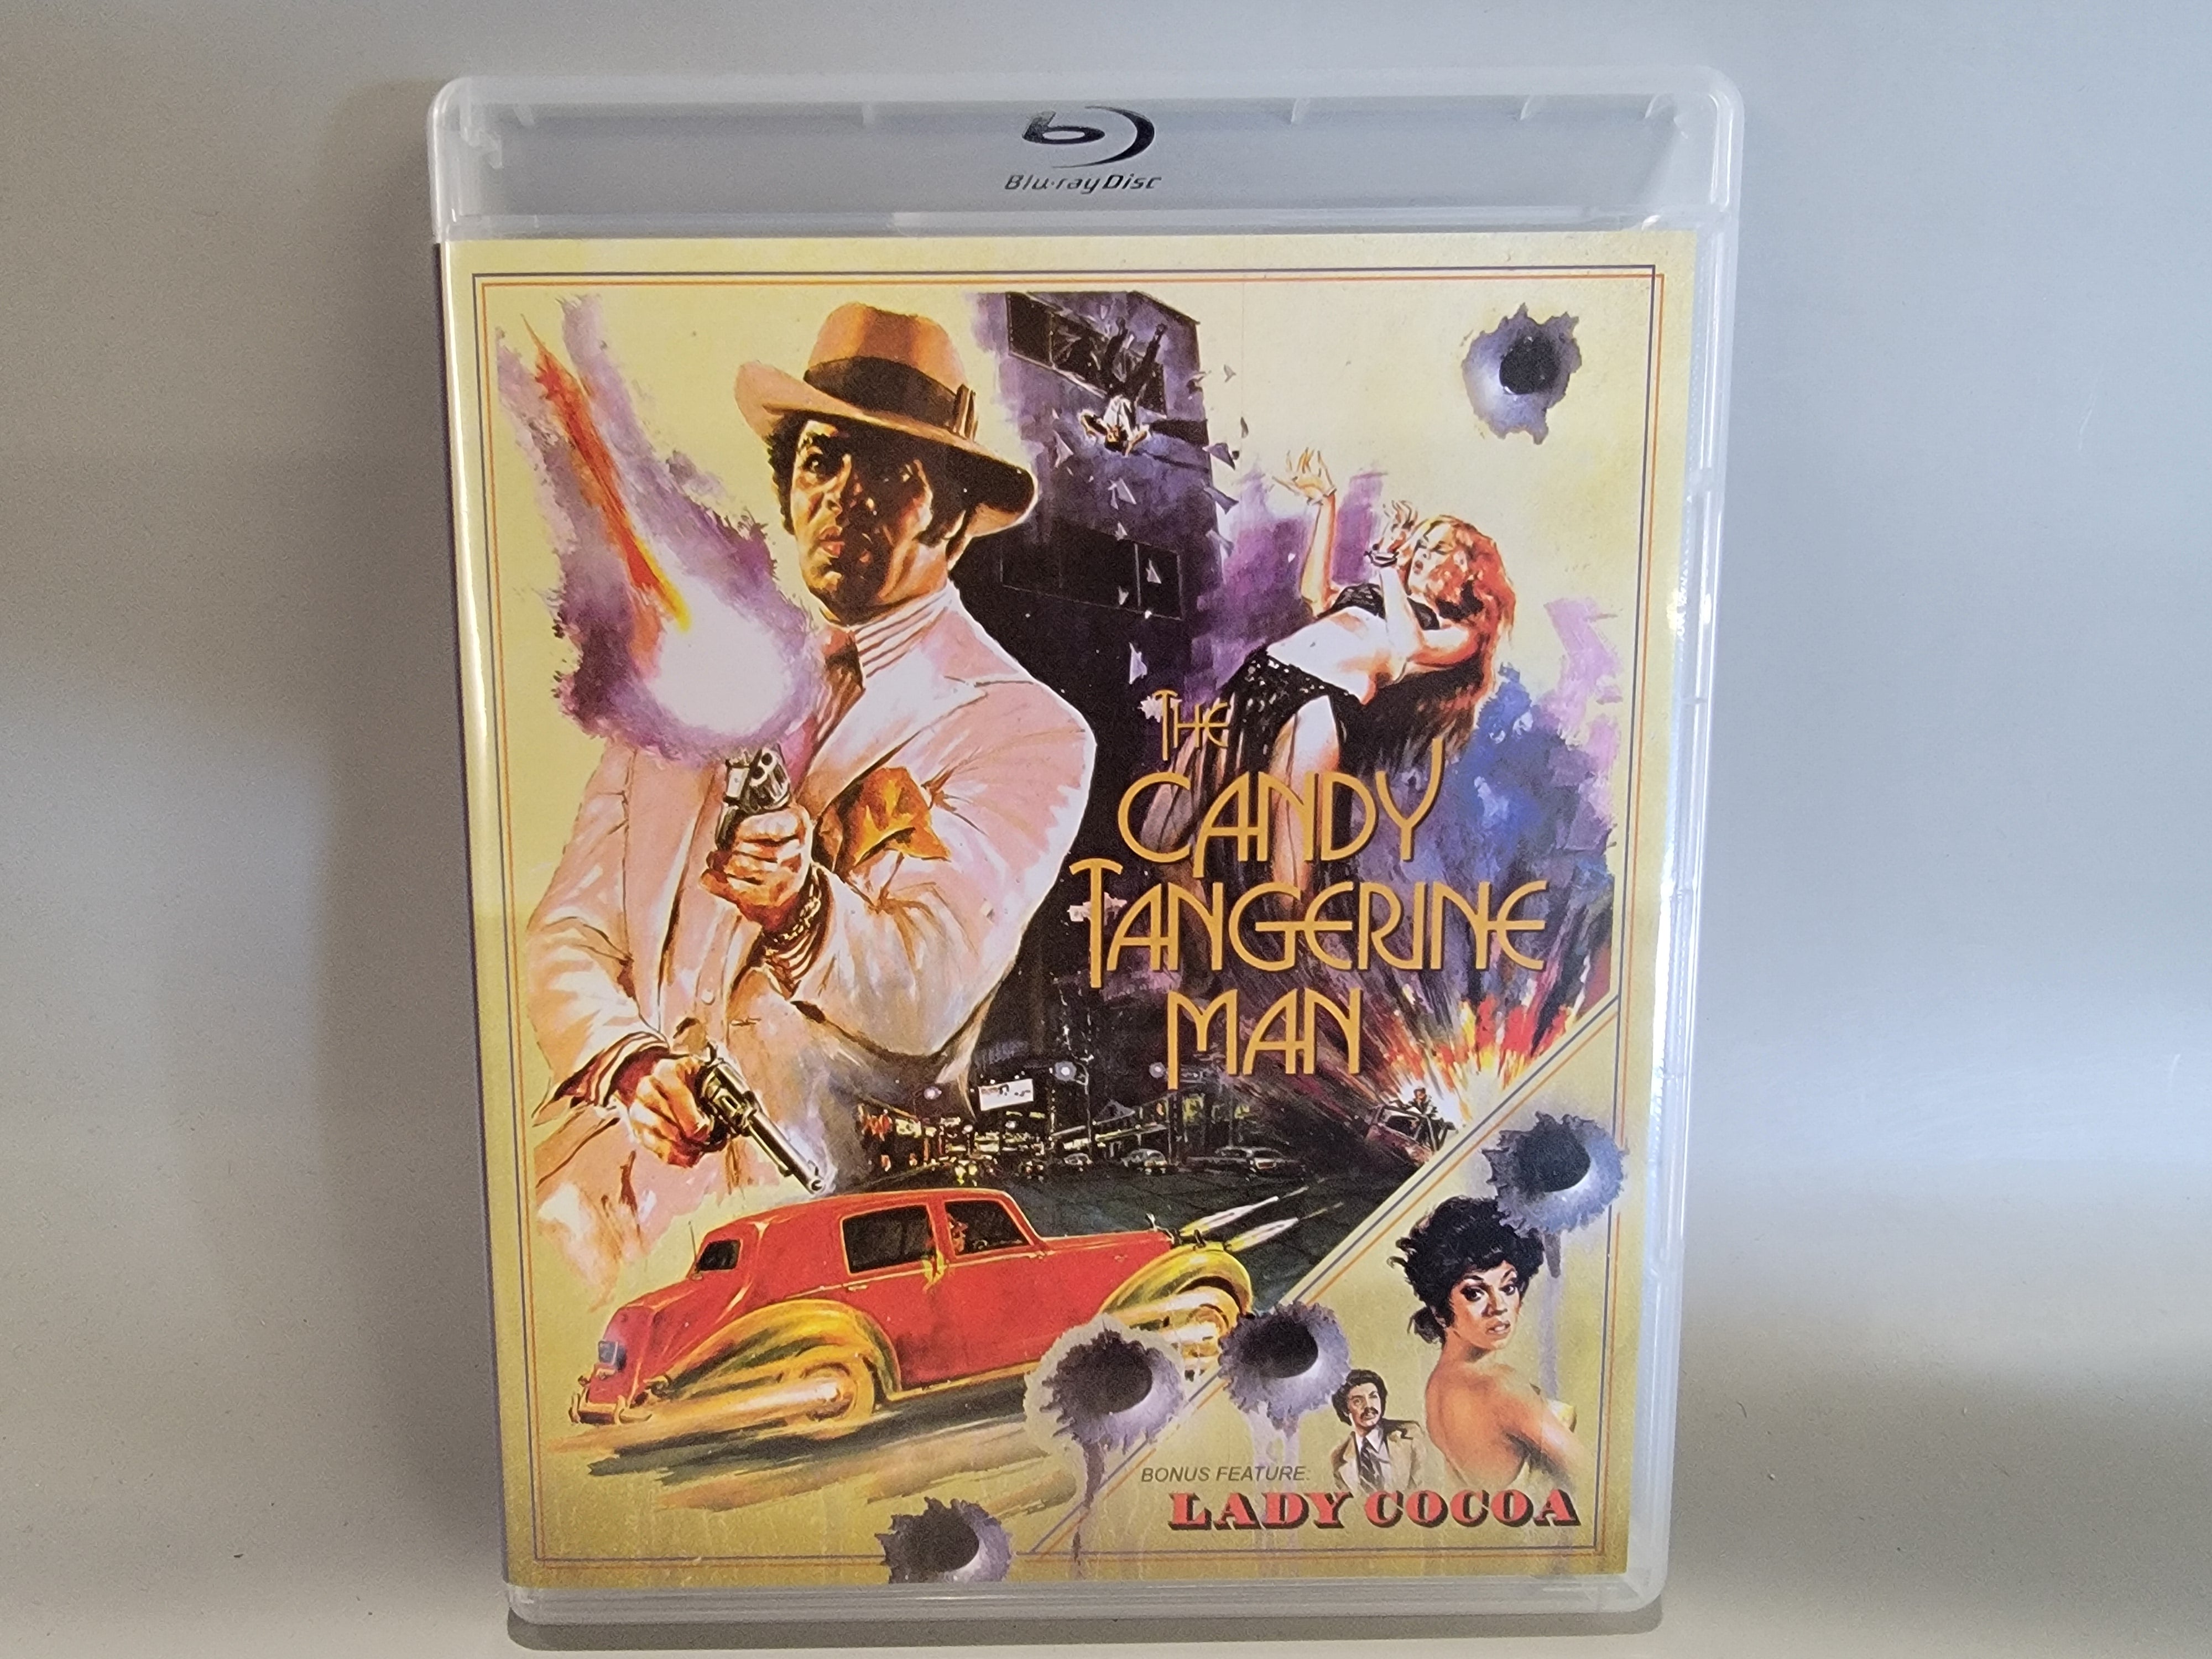 THE CANDY TANGERINE MAN / LADY COCOA BLU-RAY/DVD [USED]